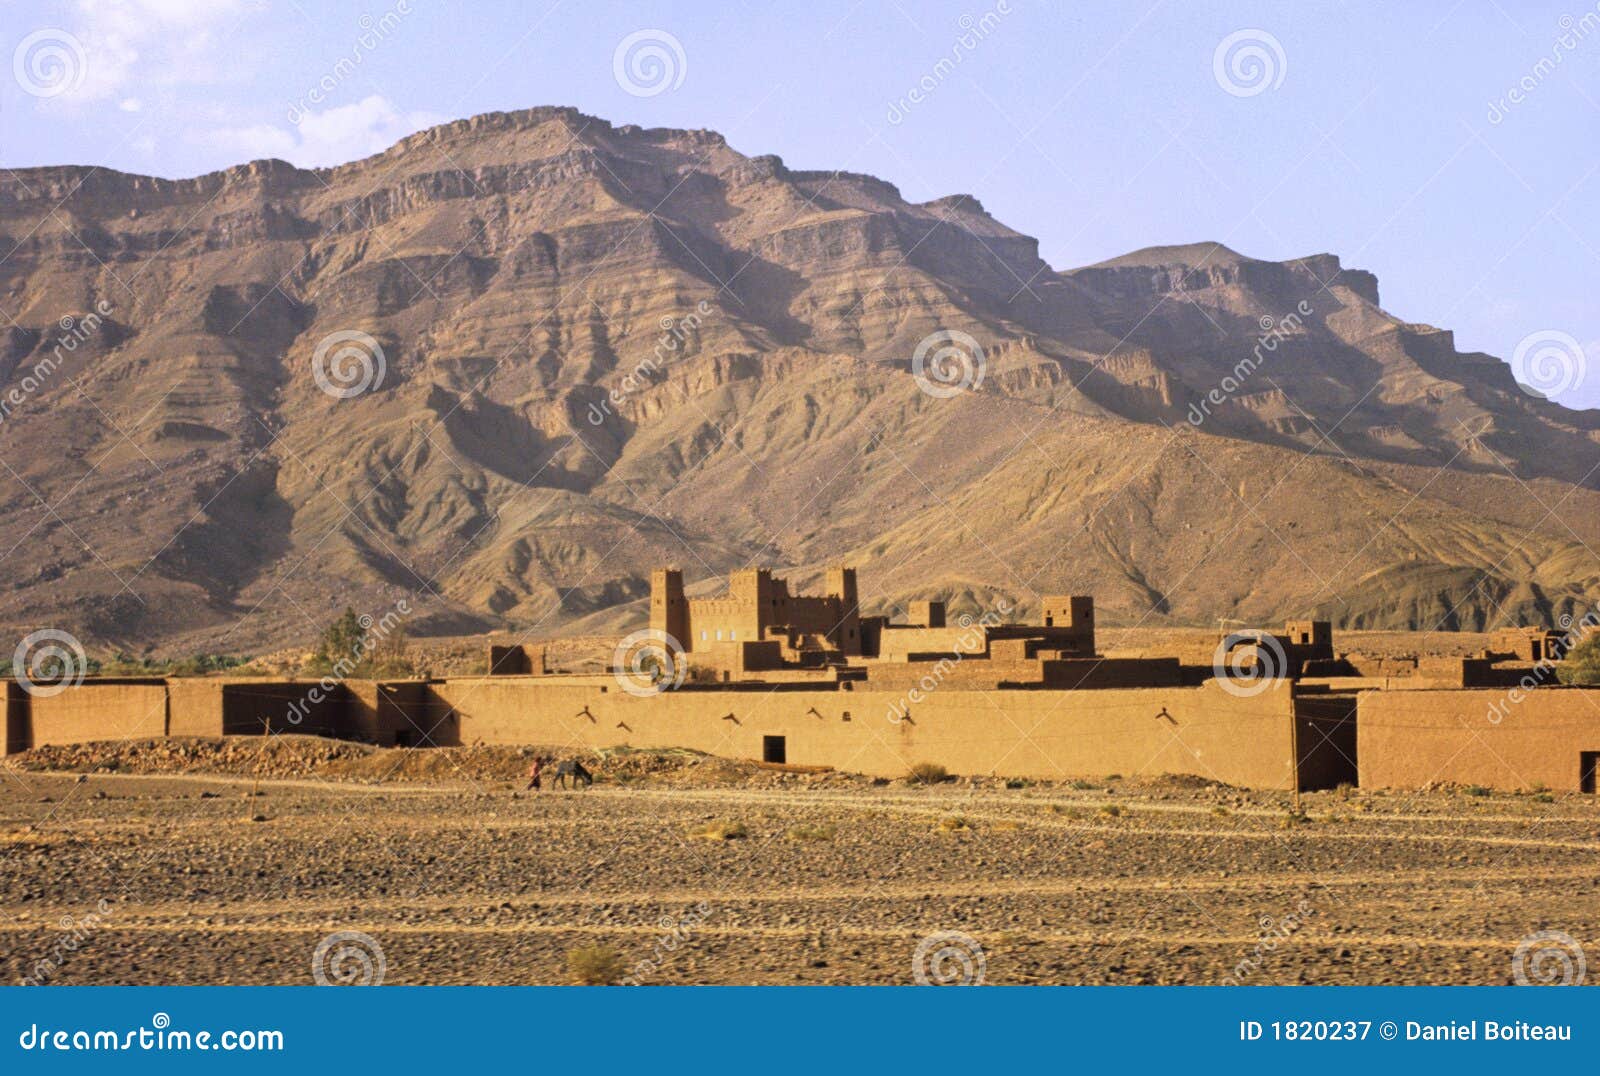 Moroccan ksar stock image. Image of earth, oasis, cliff - 1820237